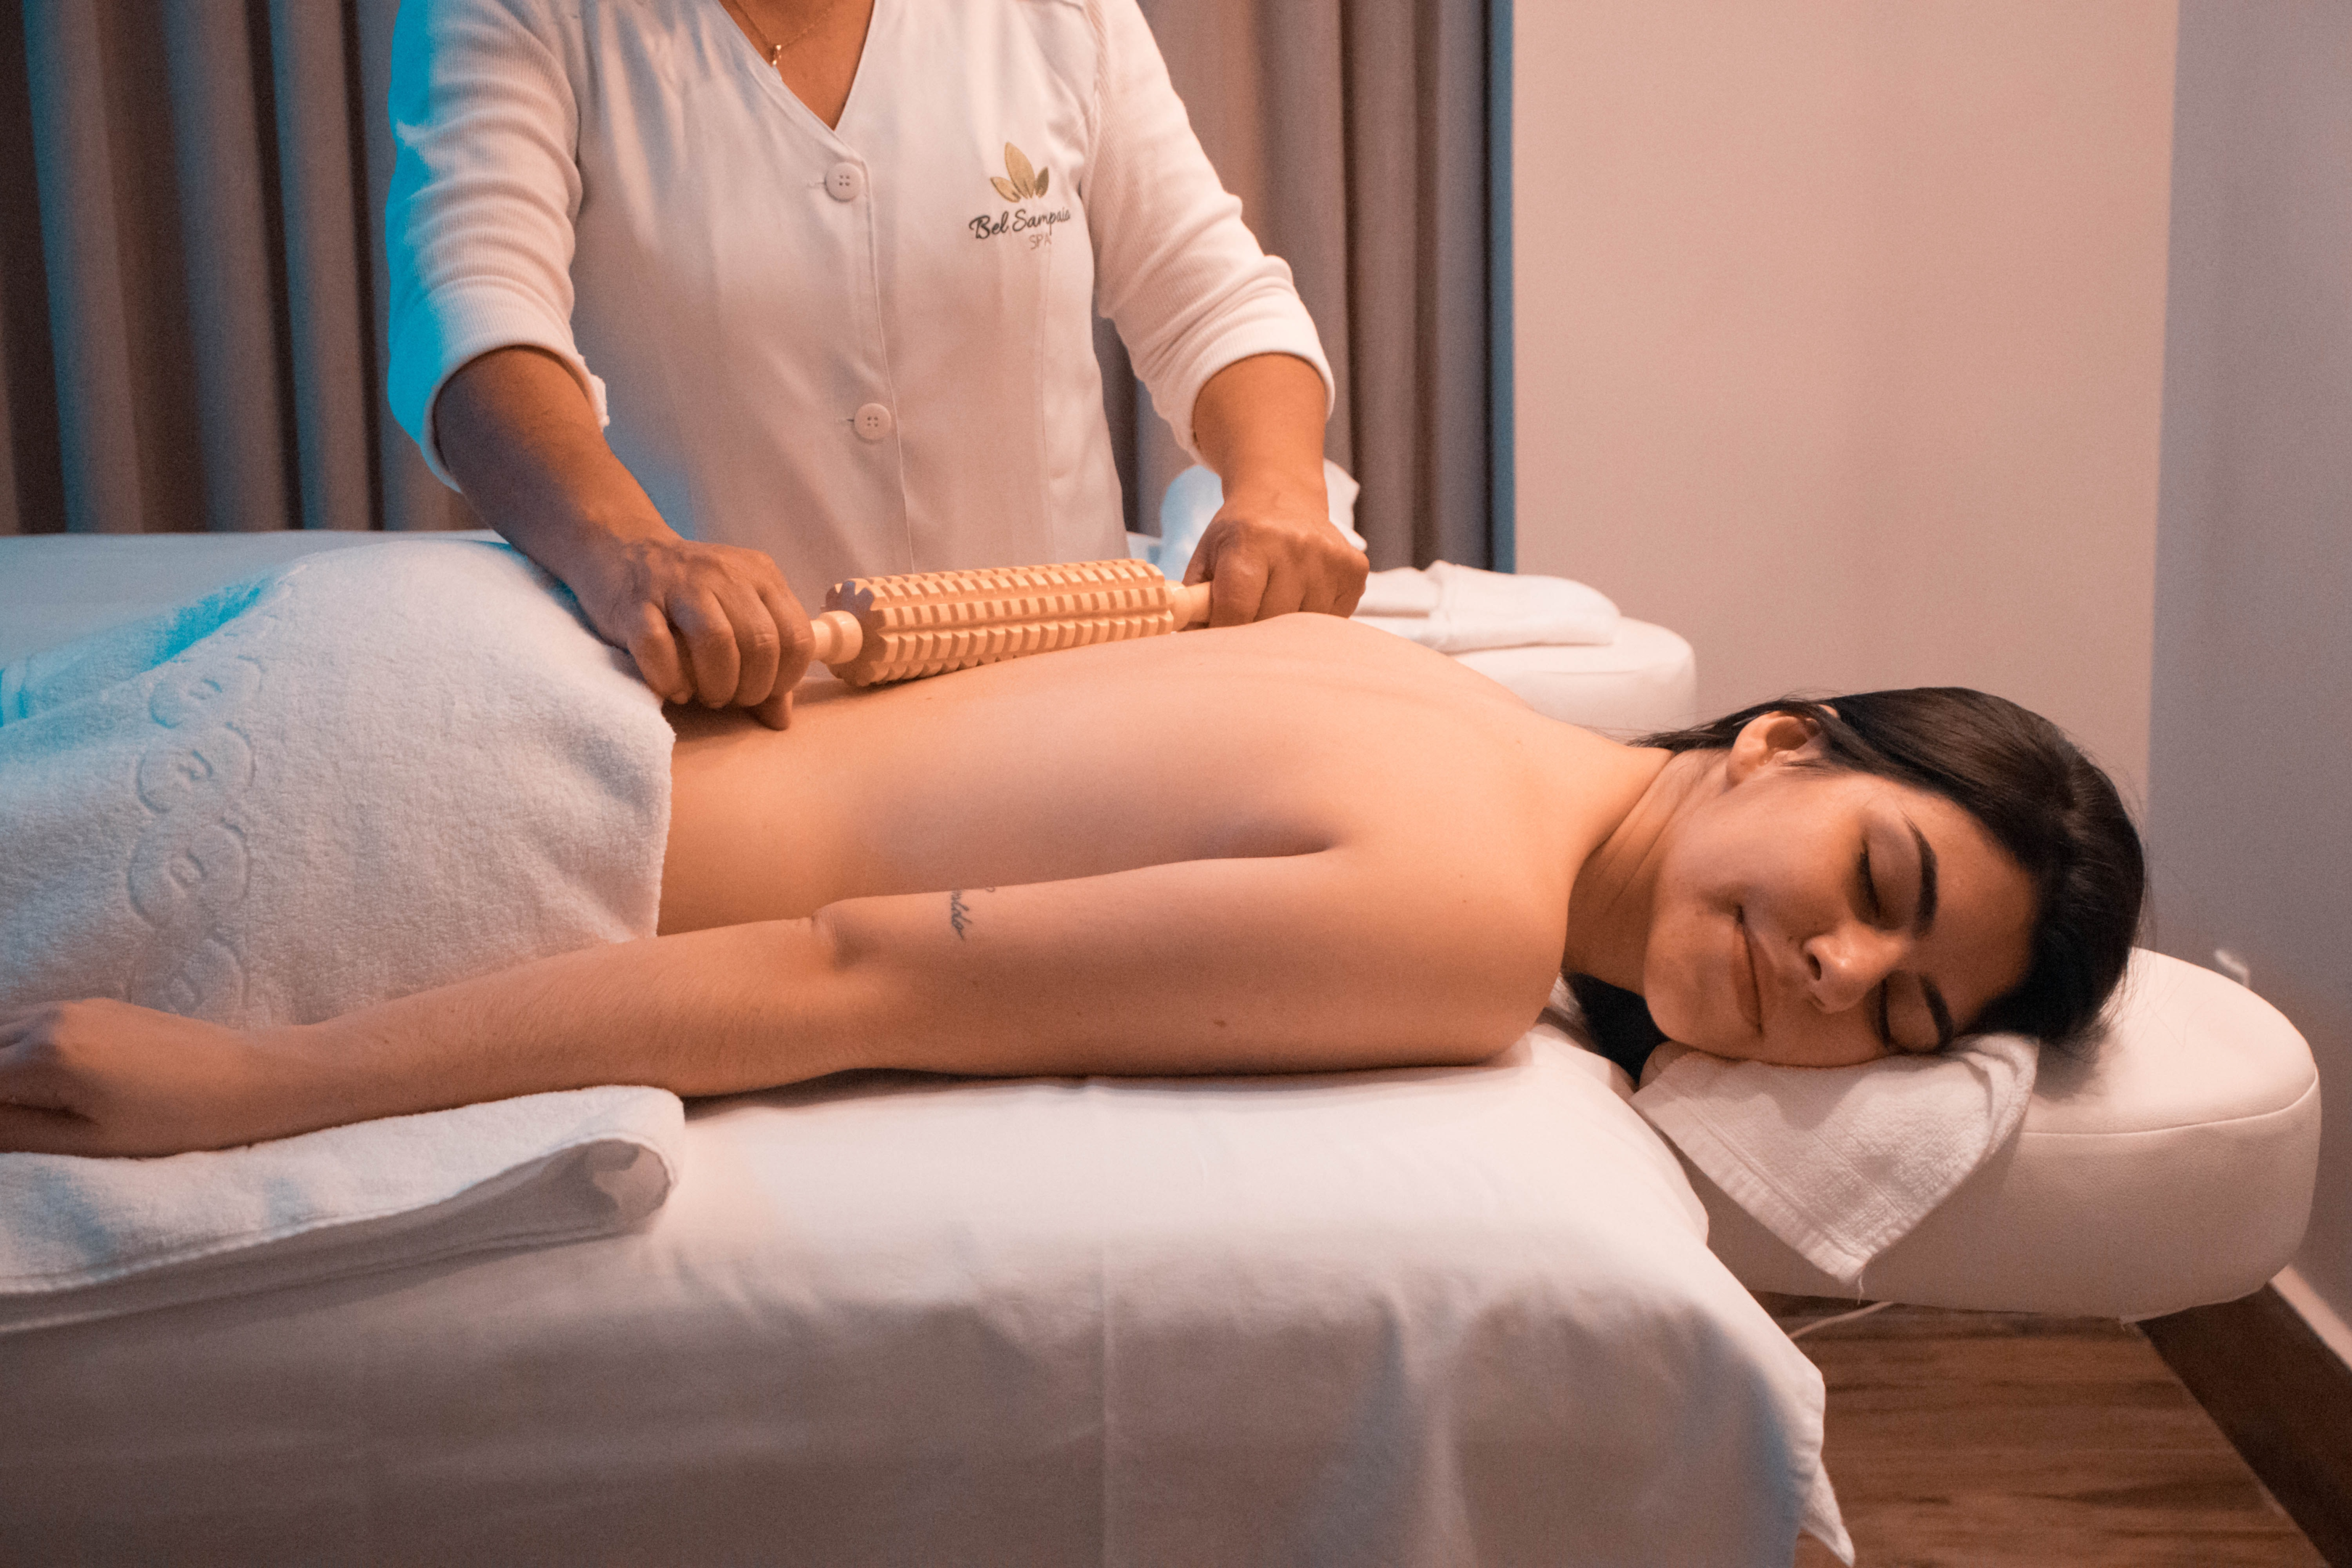 This image features a woman getting a massage, mimicking the effects of a spa capsule